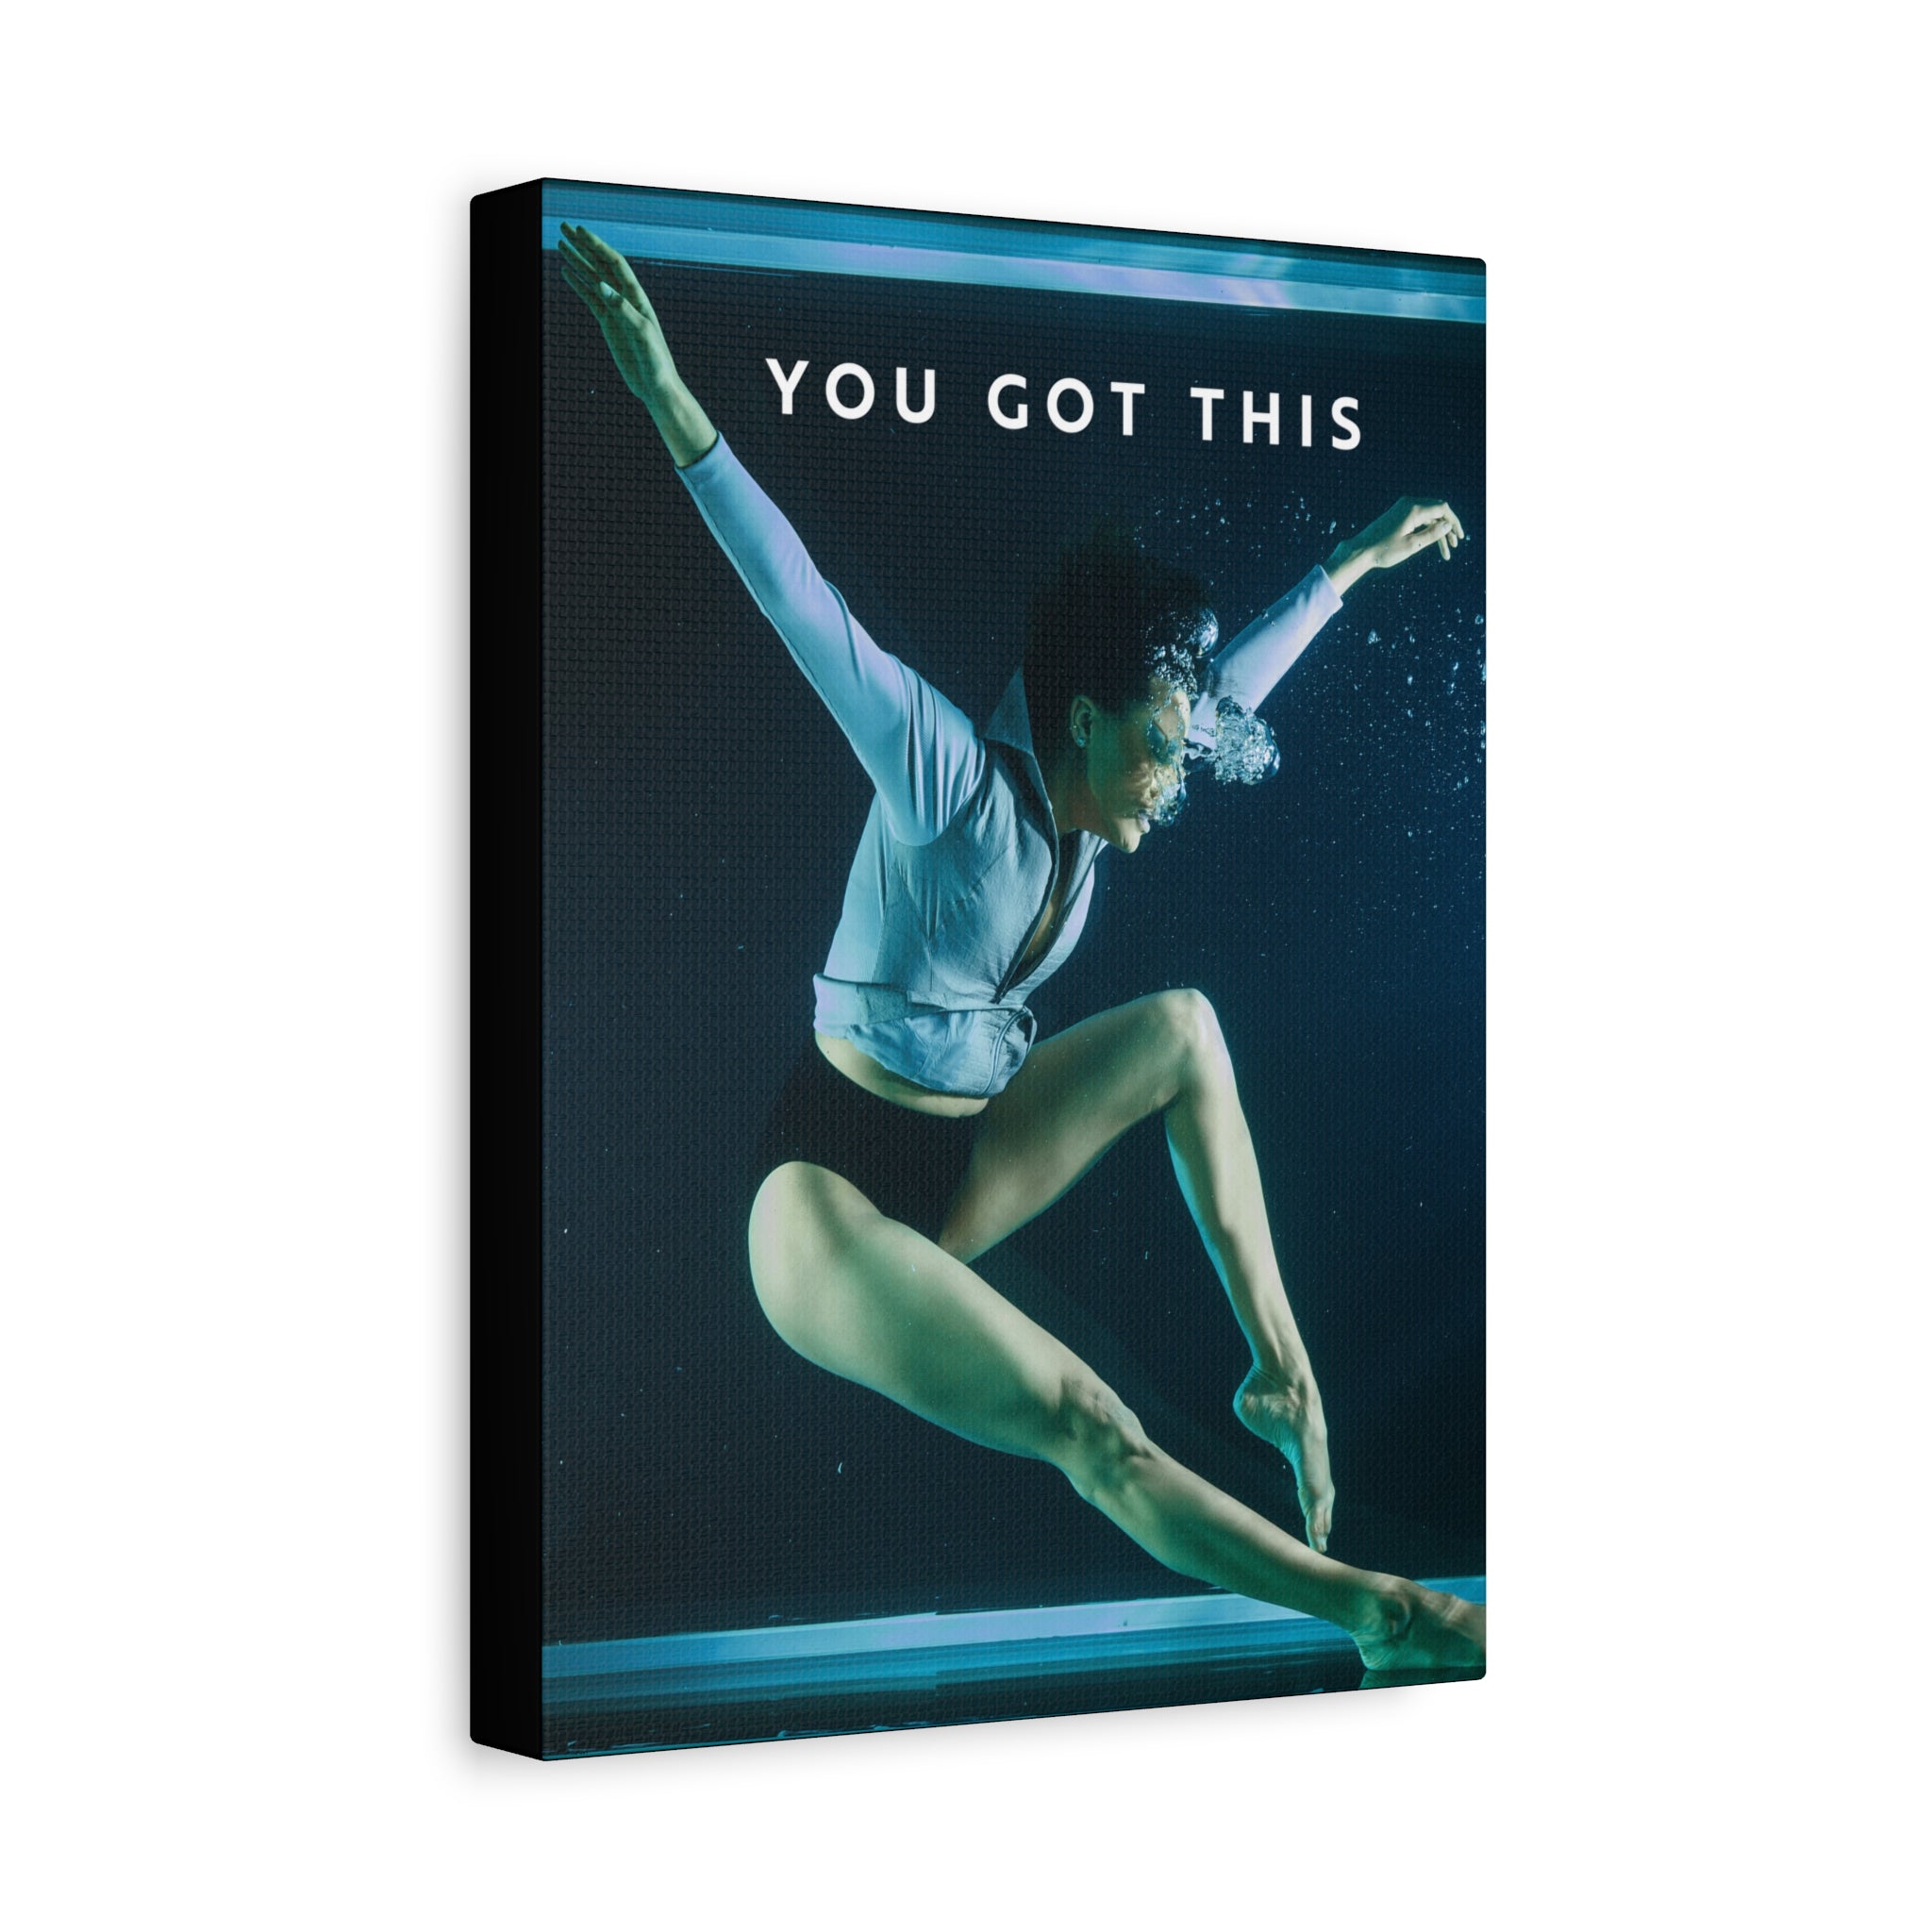 You Got This - Grace Under Pressure - Canvas Wrap additional image 3